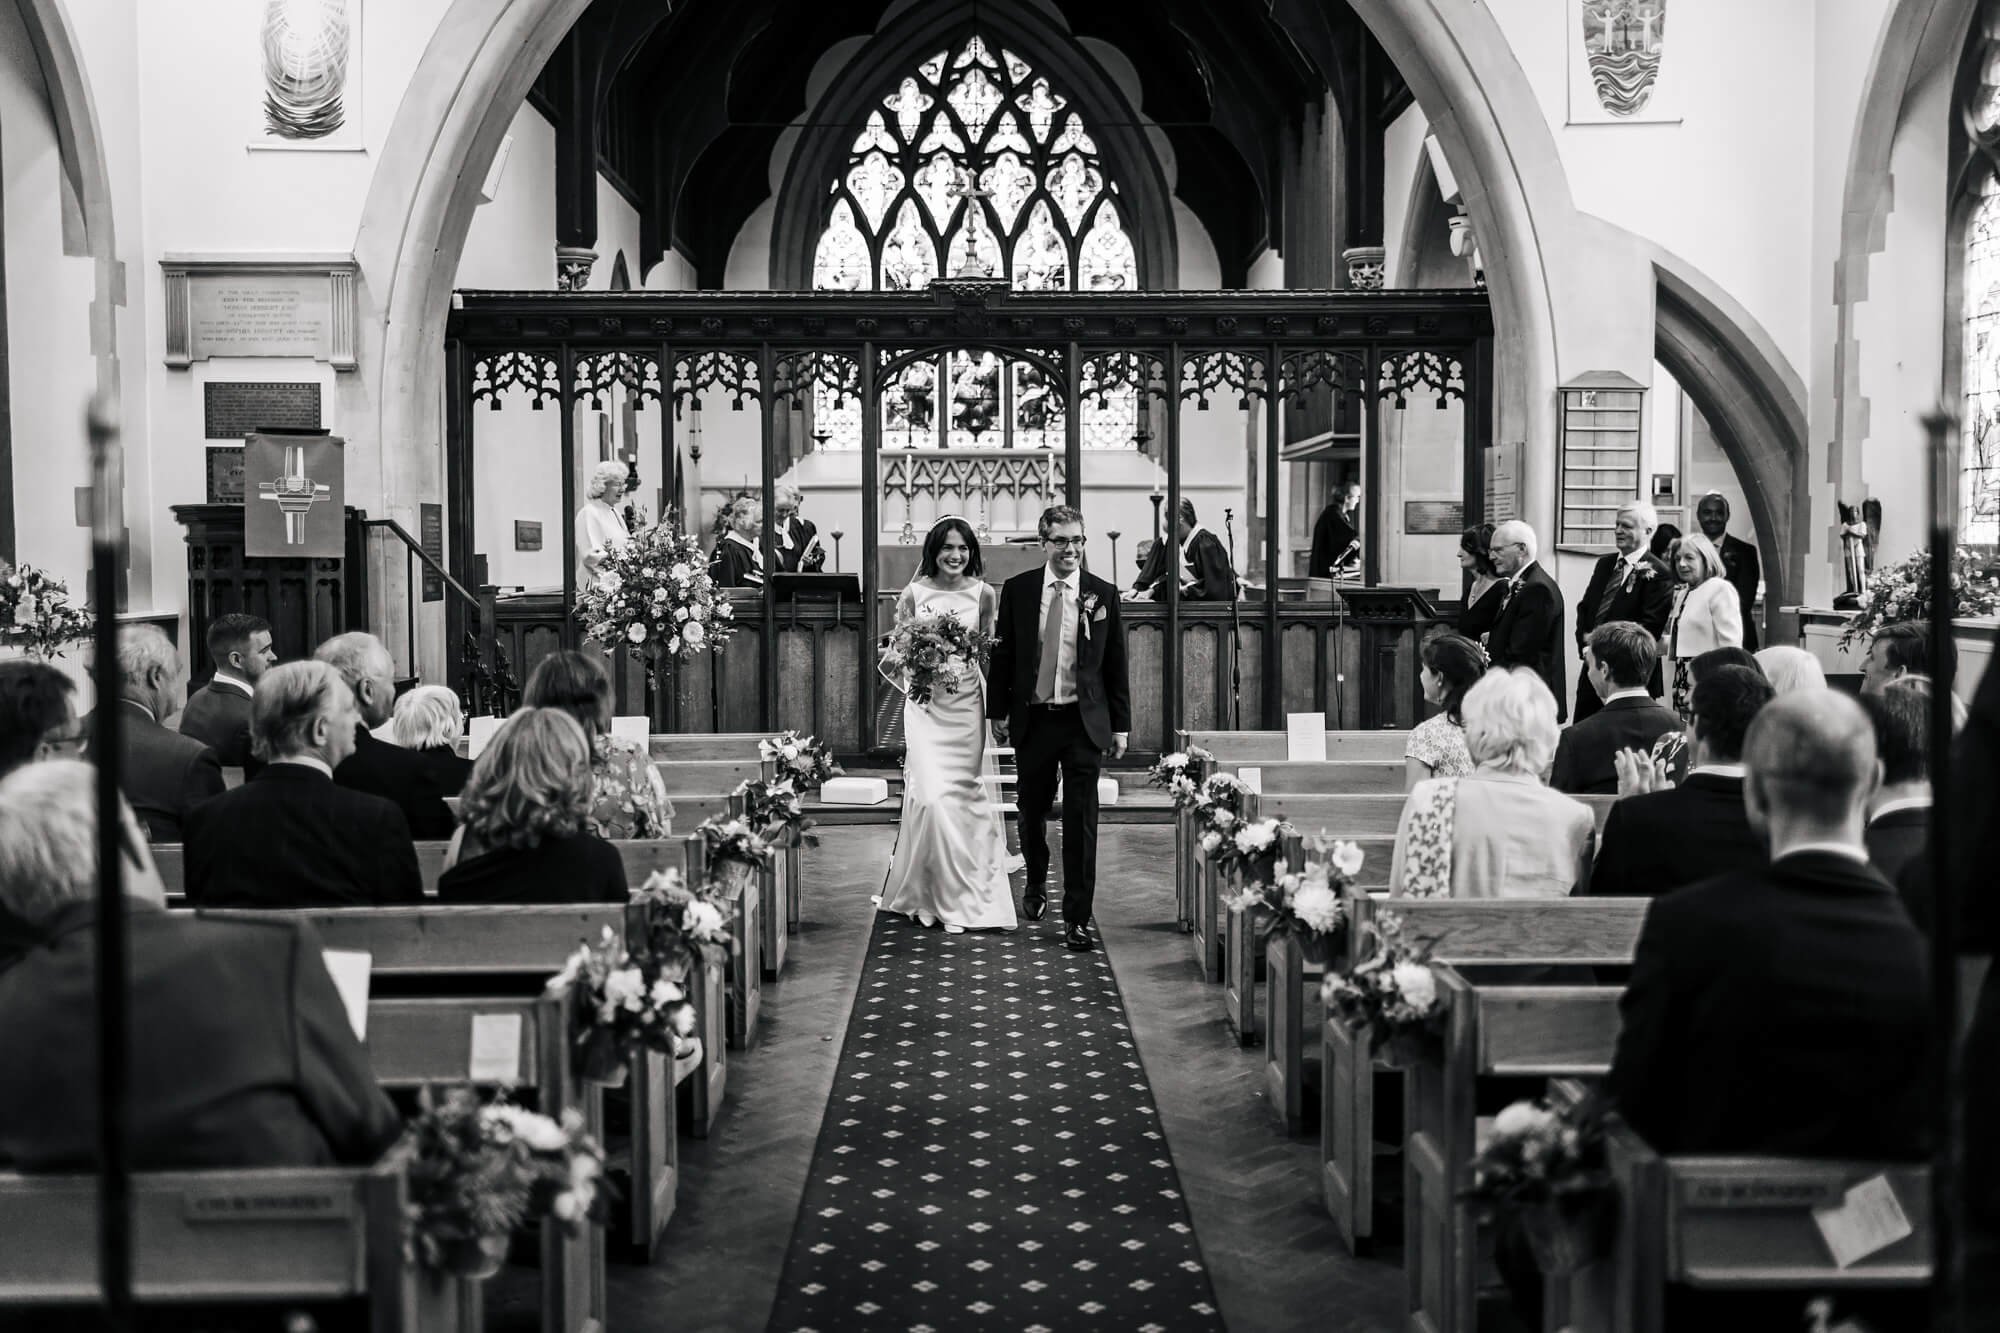 Walking down the aisle as man and wife